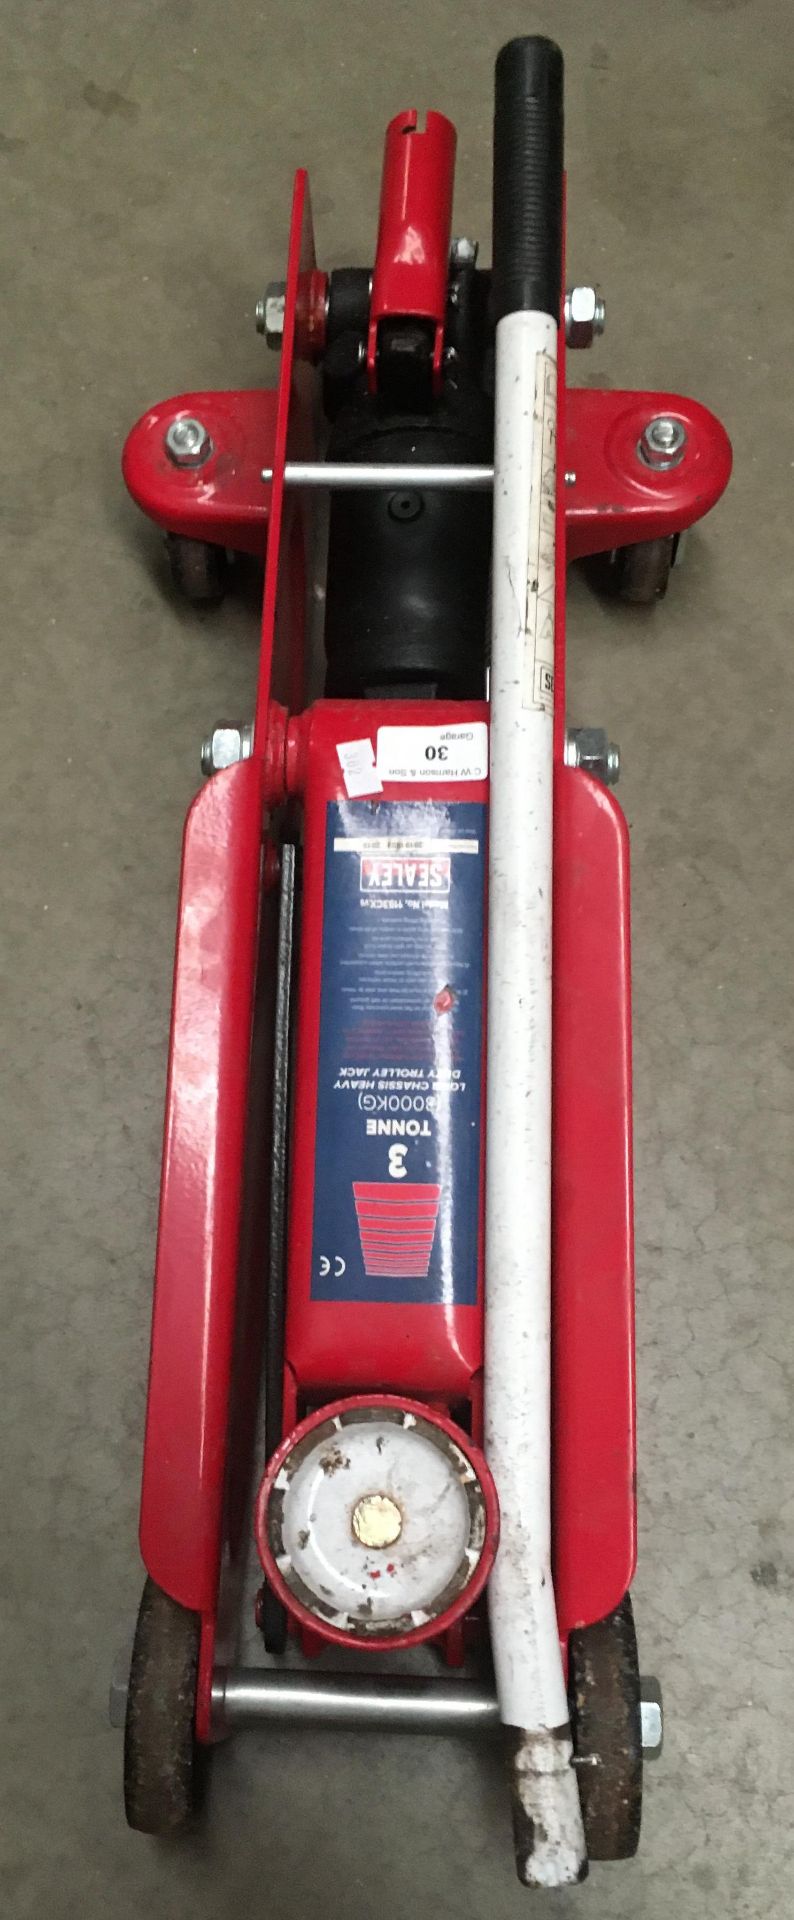 A Sealey 3 tonne (3000kg) long chassis heavy duty trolley jack model no: 1153CX-V5 complete with